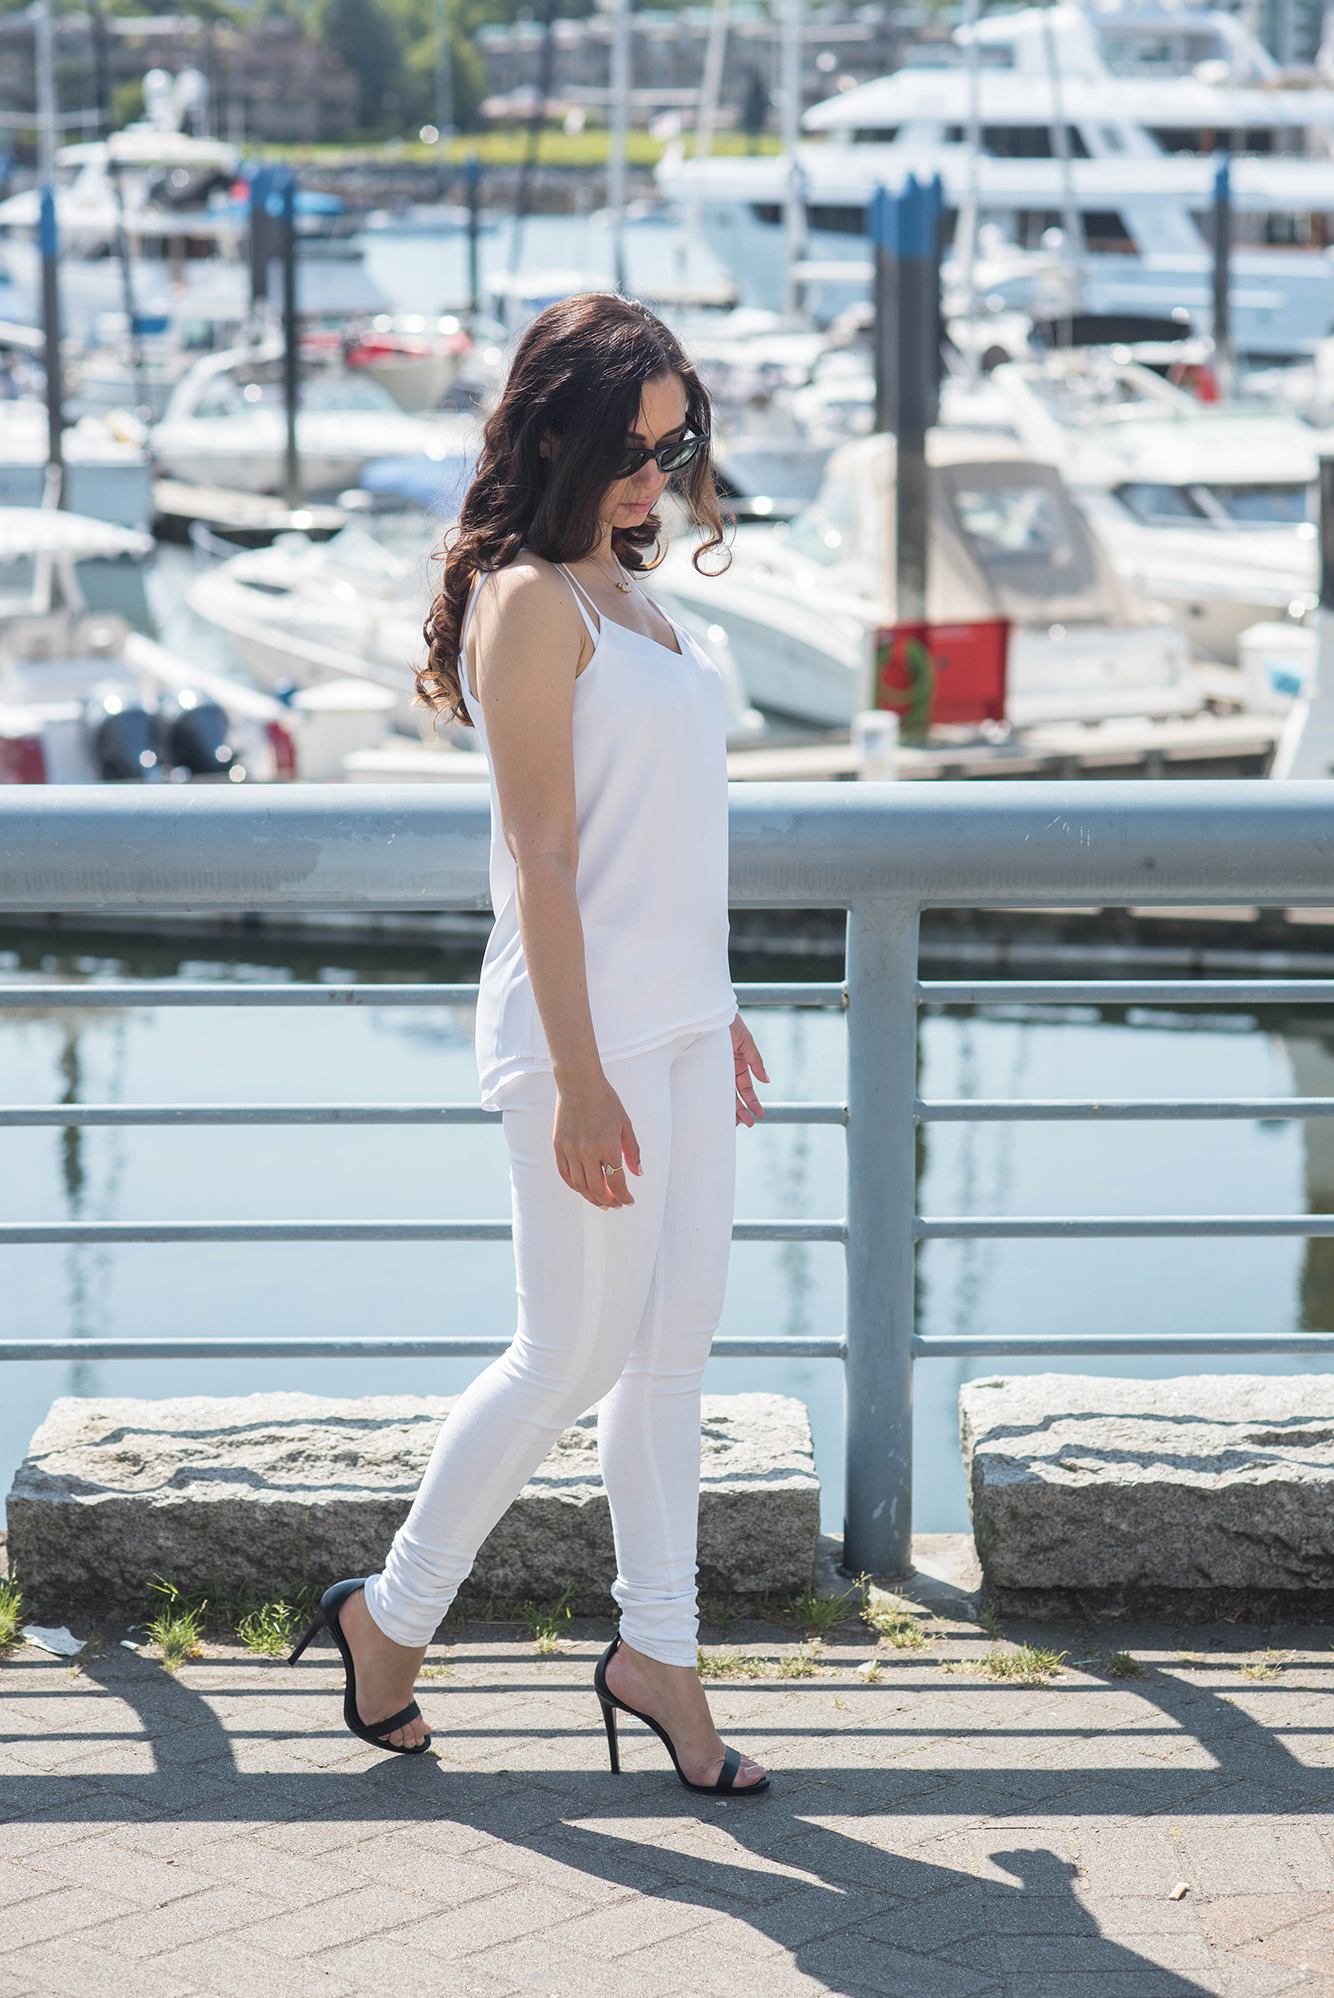 coco-and-vera-top-vancouver-fashion-blog-top-canadian-fashion-blog-top-blogger-street-style-summer-style-all-white-everything-express-top-mavi-jeans-steve-madden-sandals-rayban-sunglasses